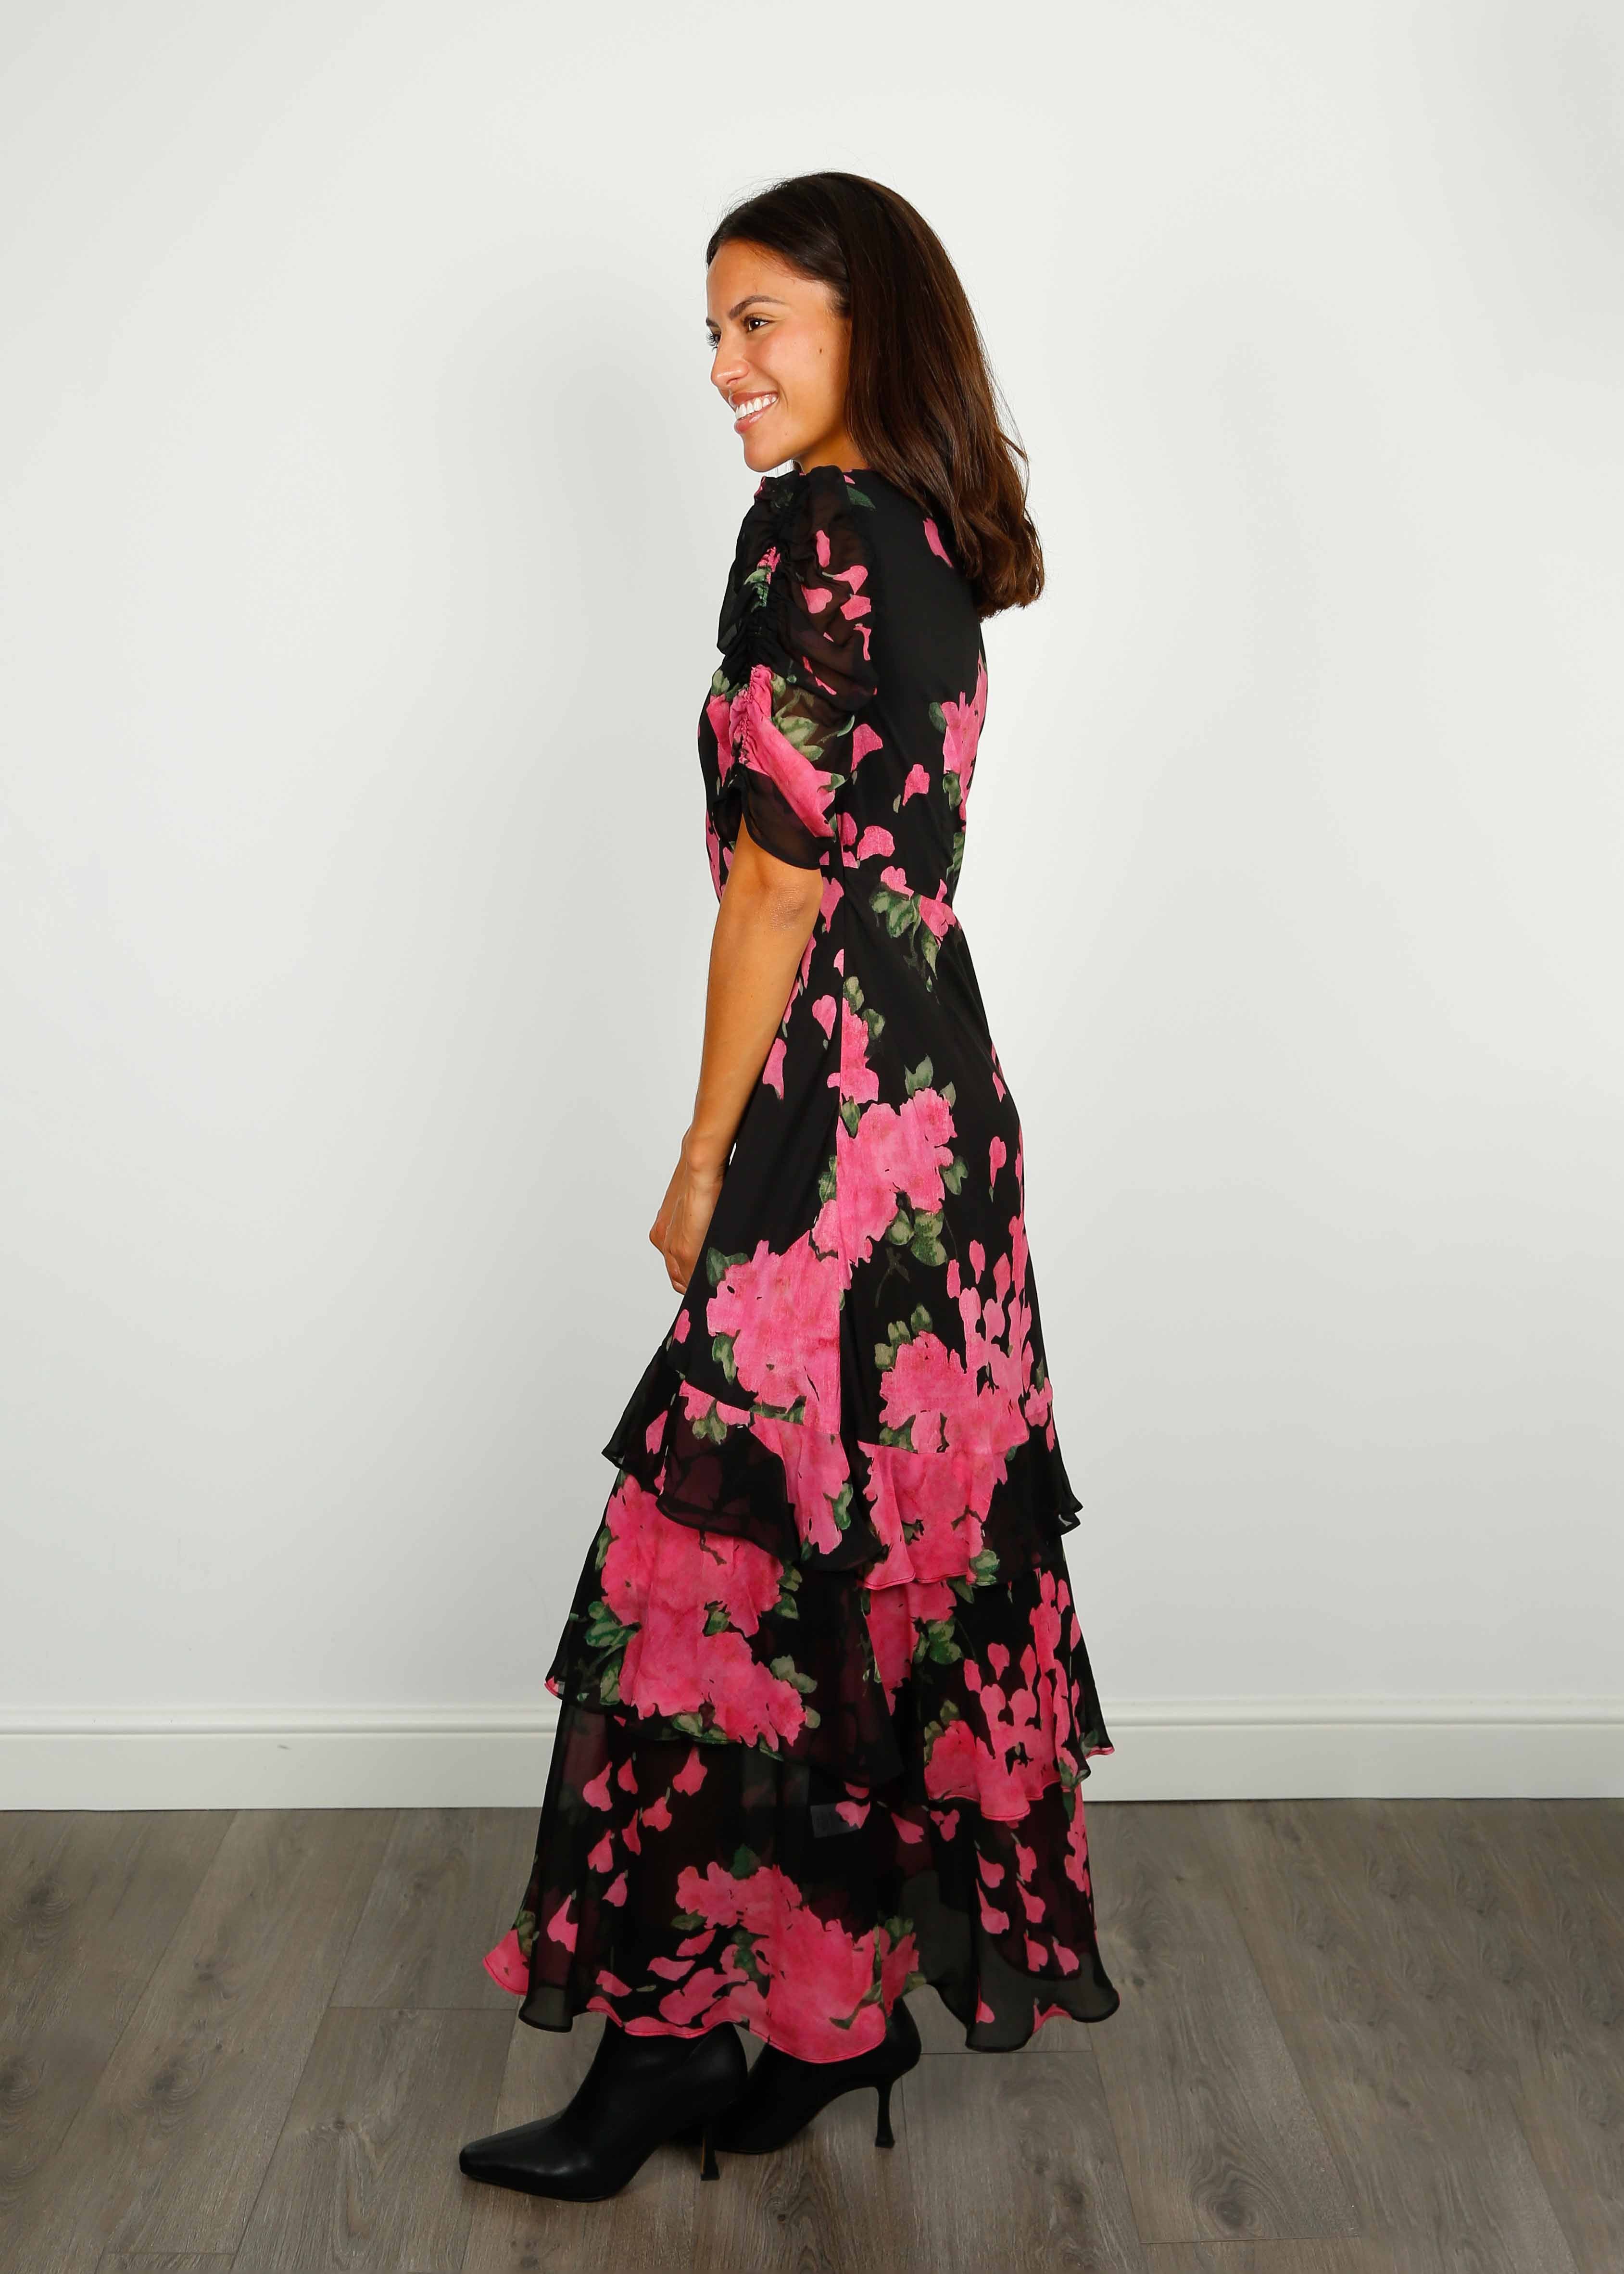 RIXO Evelyn Dress in Blossom Pink